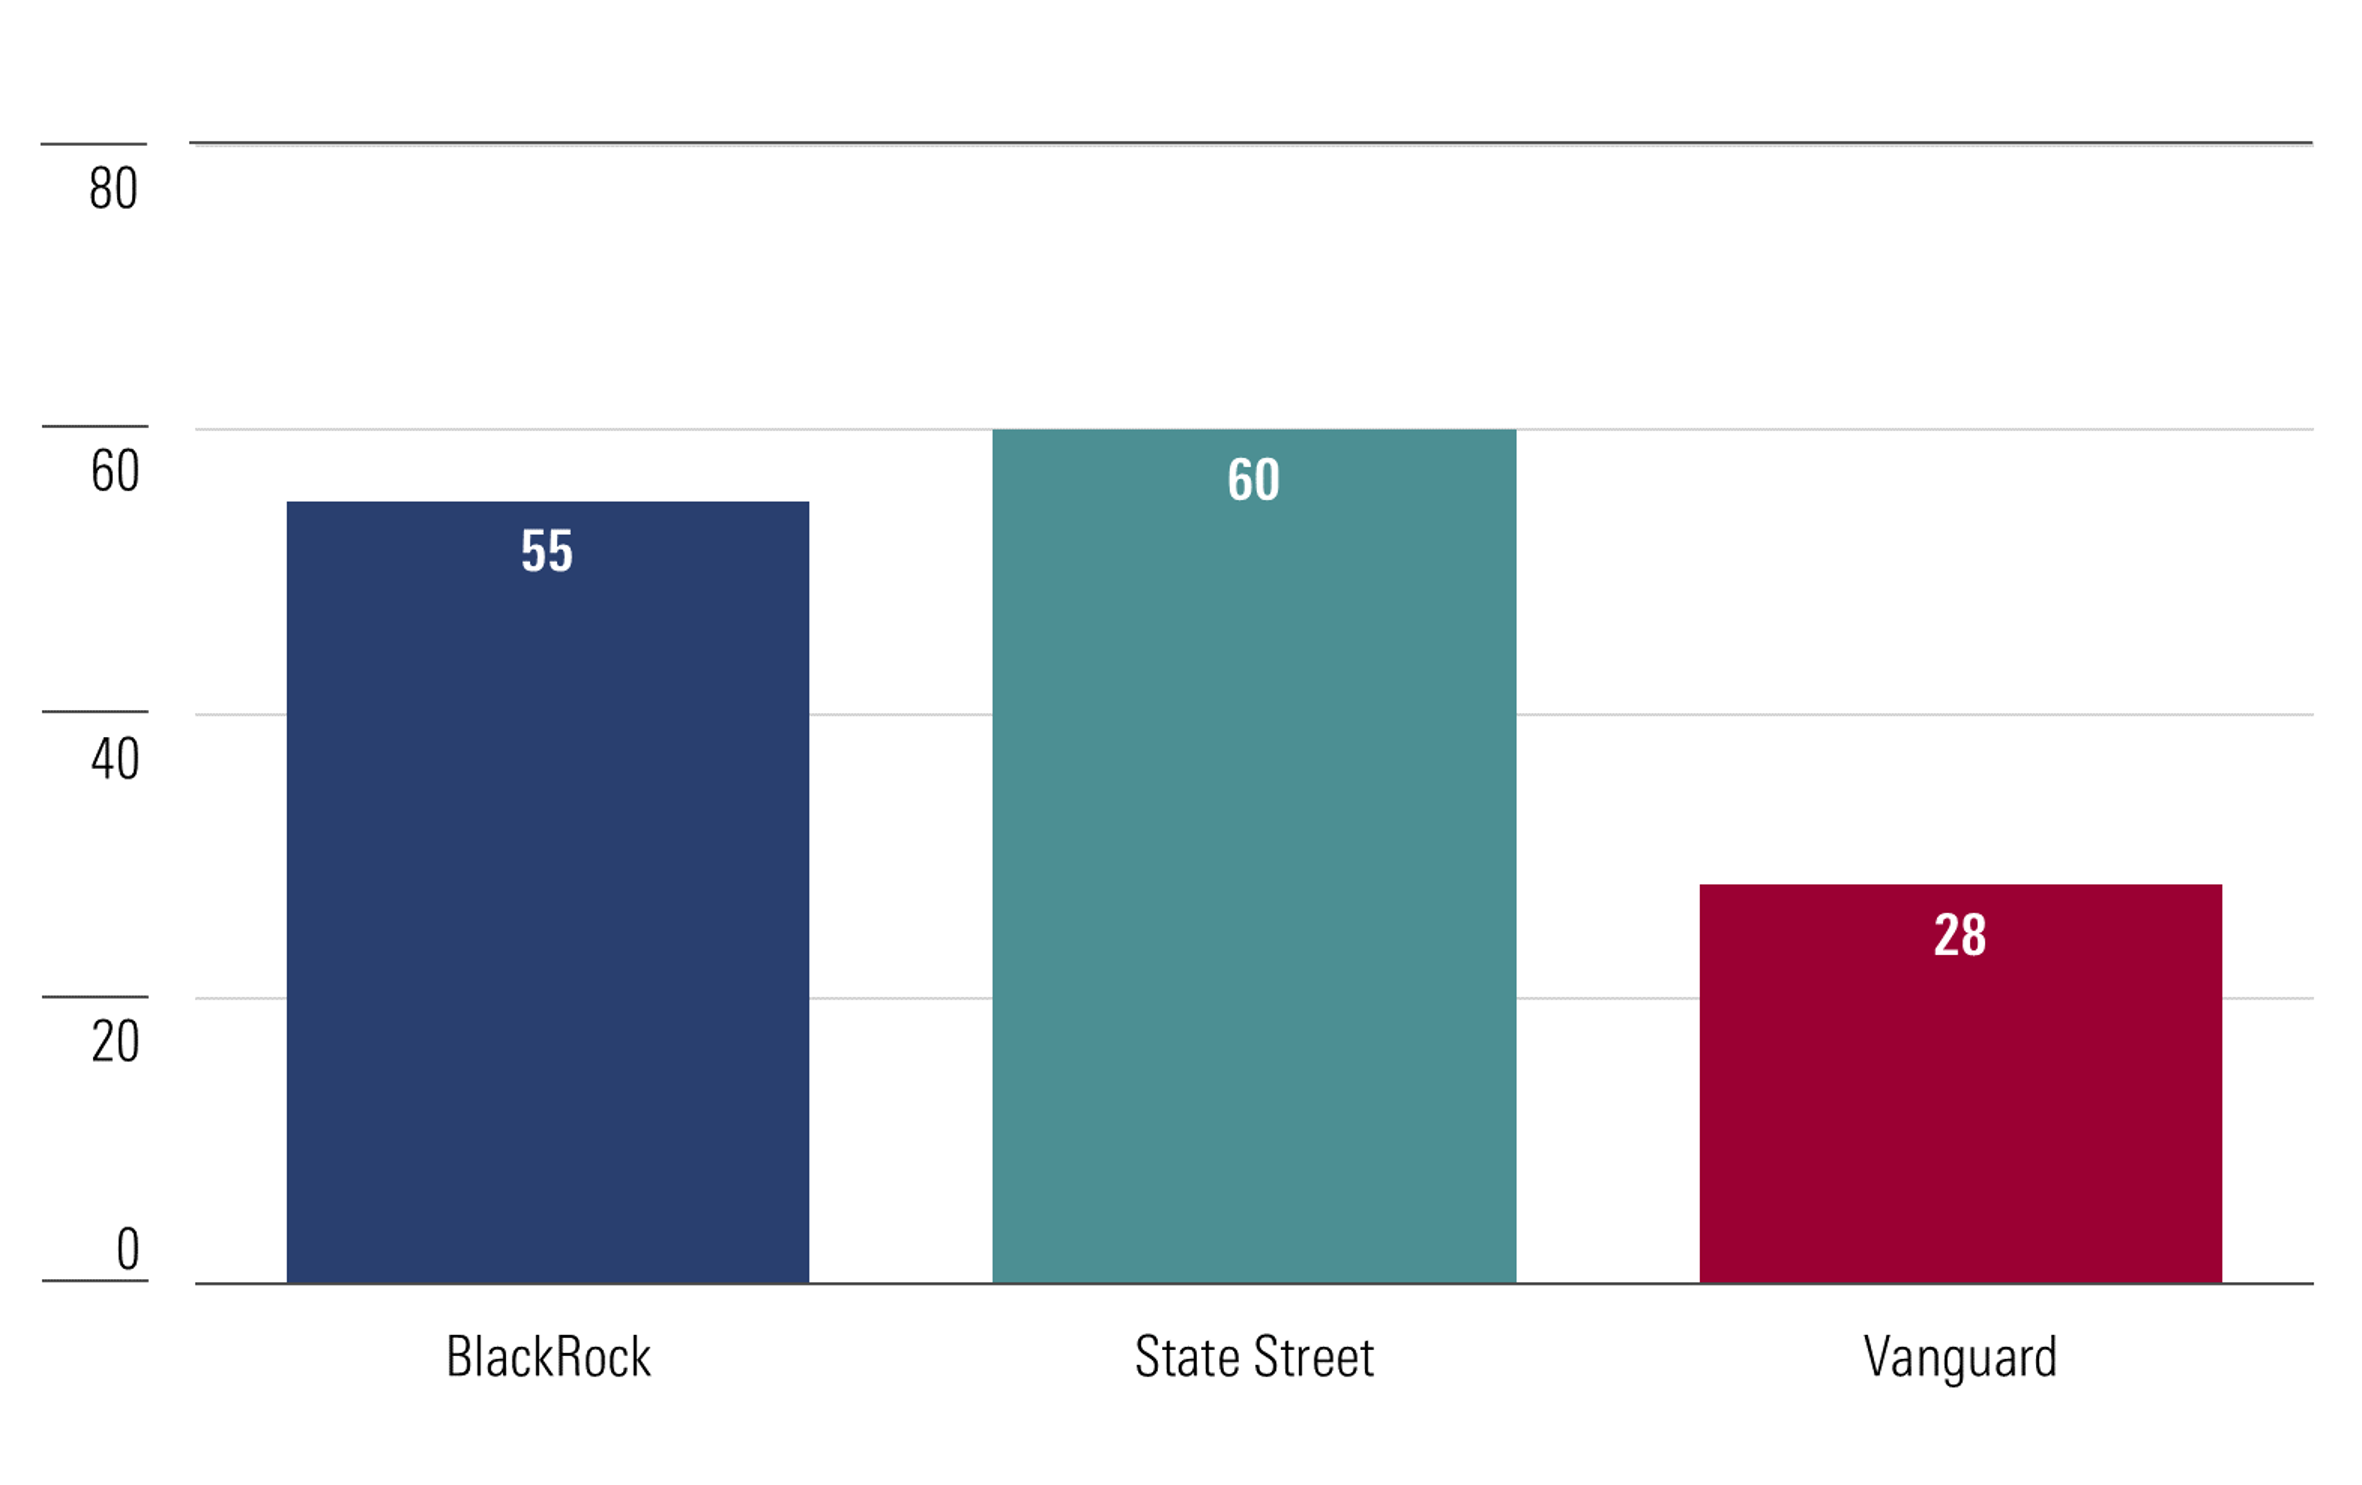 Chart showing the number of key resolutions supported by the Big Three firms (BlackRock, State Street, and Vanguard) out of 100 key resolutions. BlackRock supported 55 resolutions, State Street supported 60, and Vanguard supported 28.